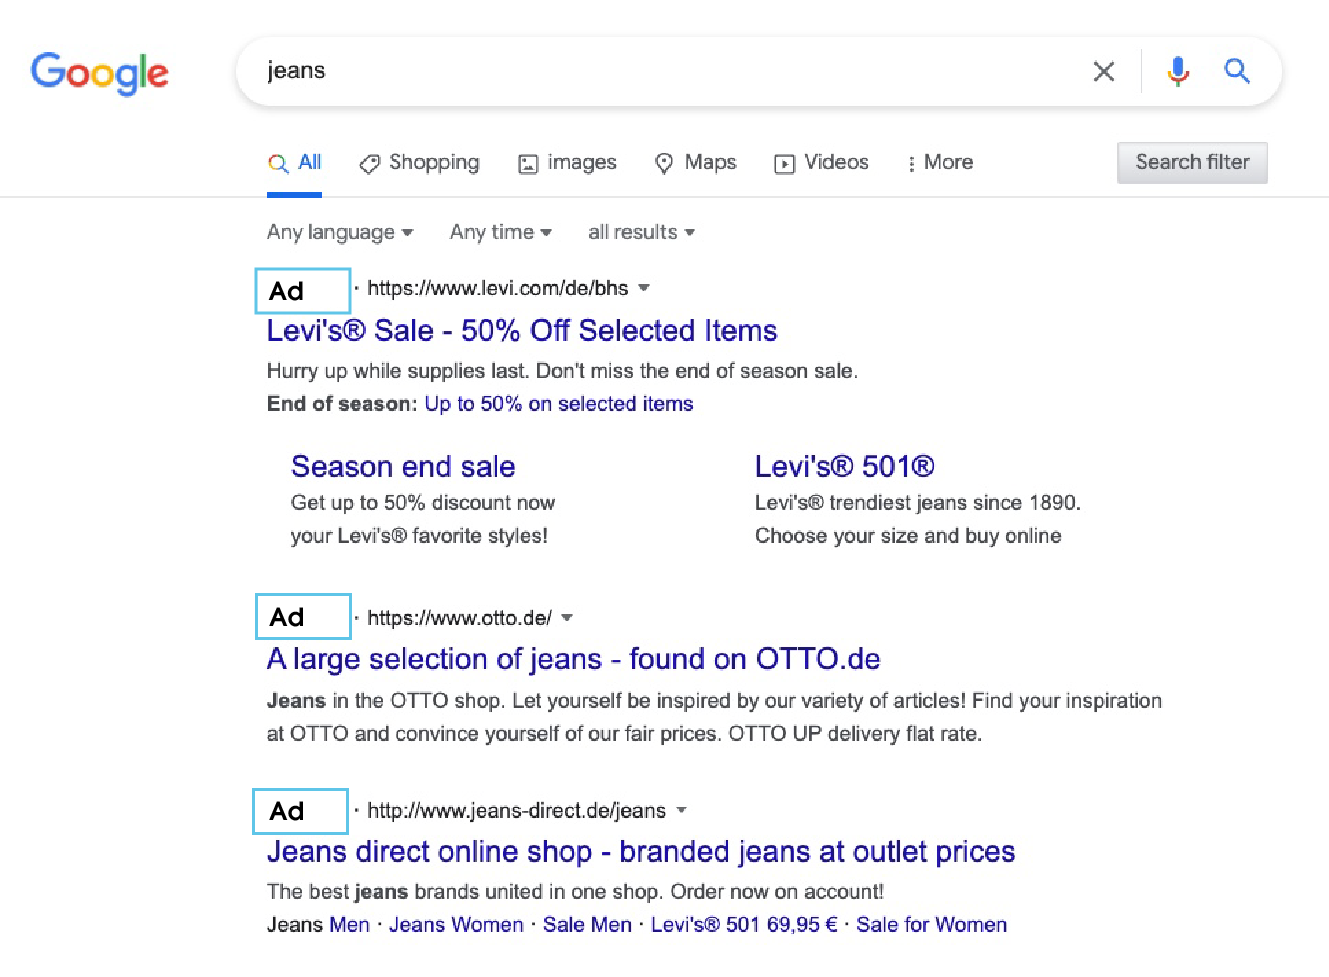 The image shows a screenshot of a Google search query for the keyword "jeans". The first results of the SERP shows directly paid ads at the very top below the search bar, marked with the bold word "ad" (framed in blue in the screenshot).